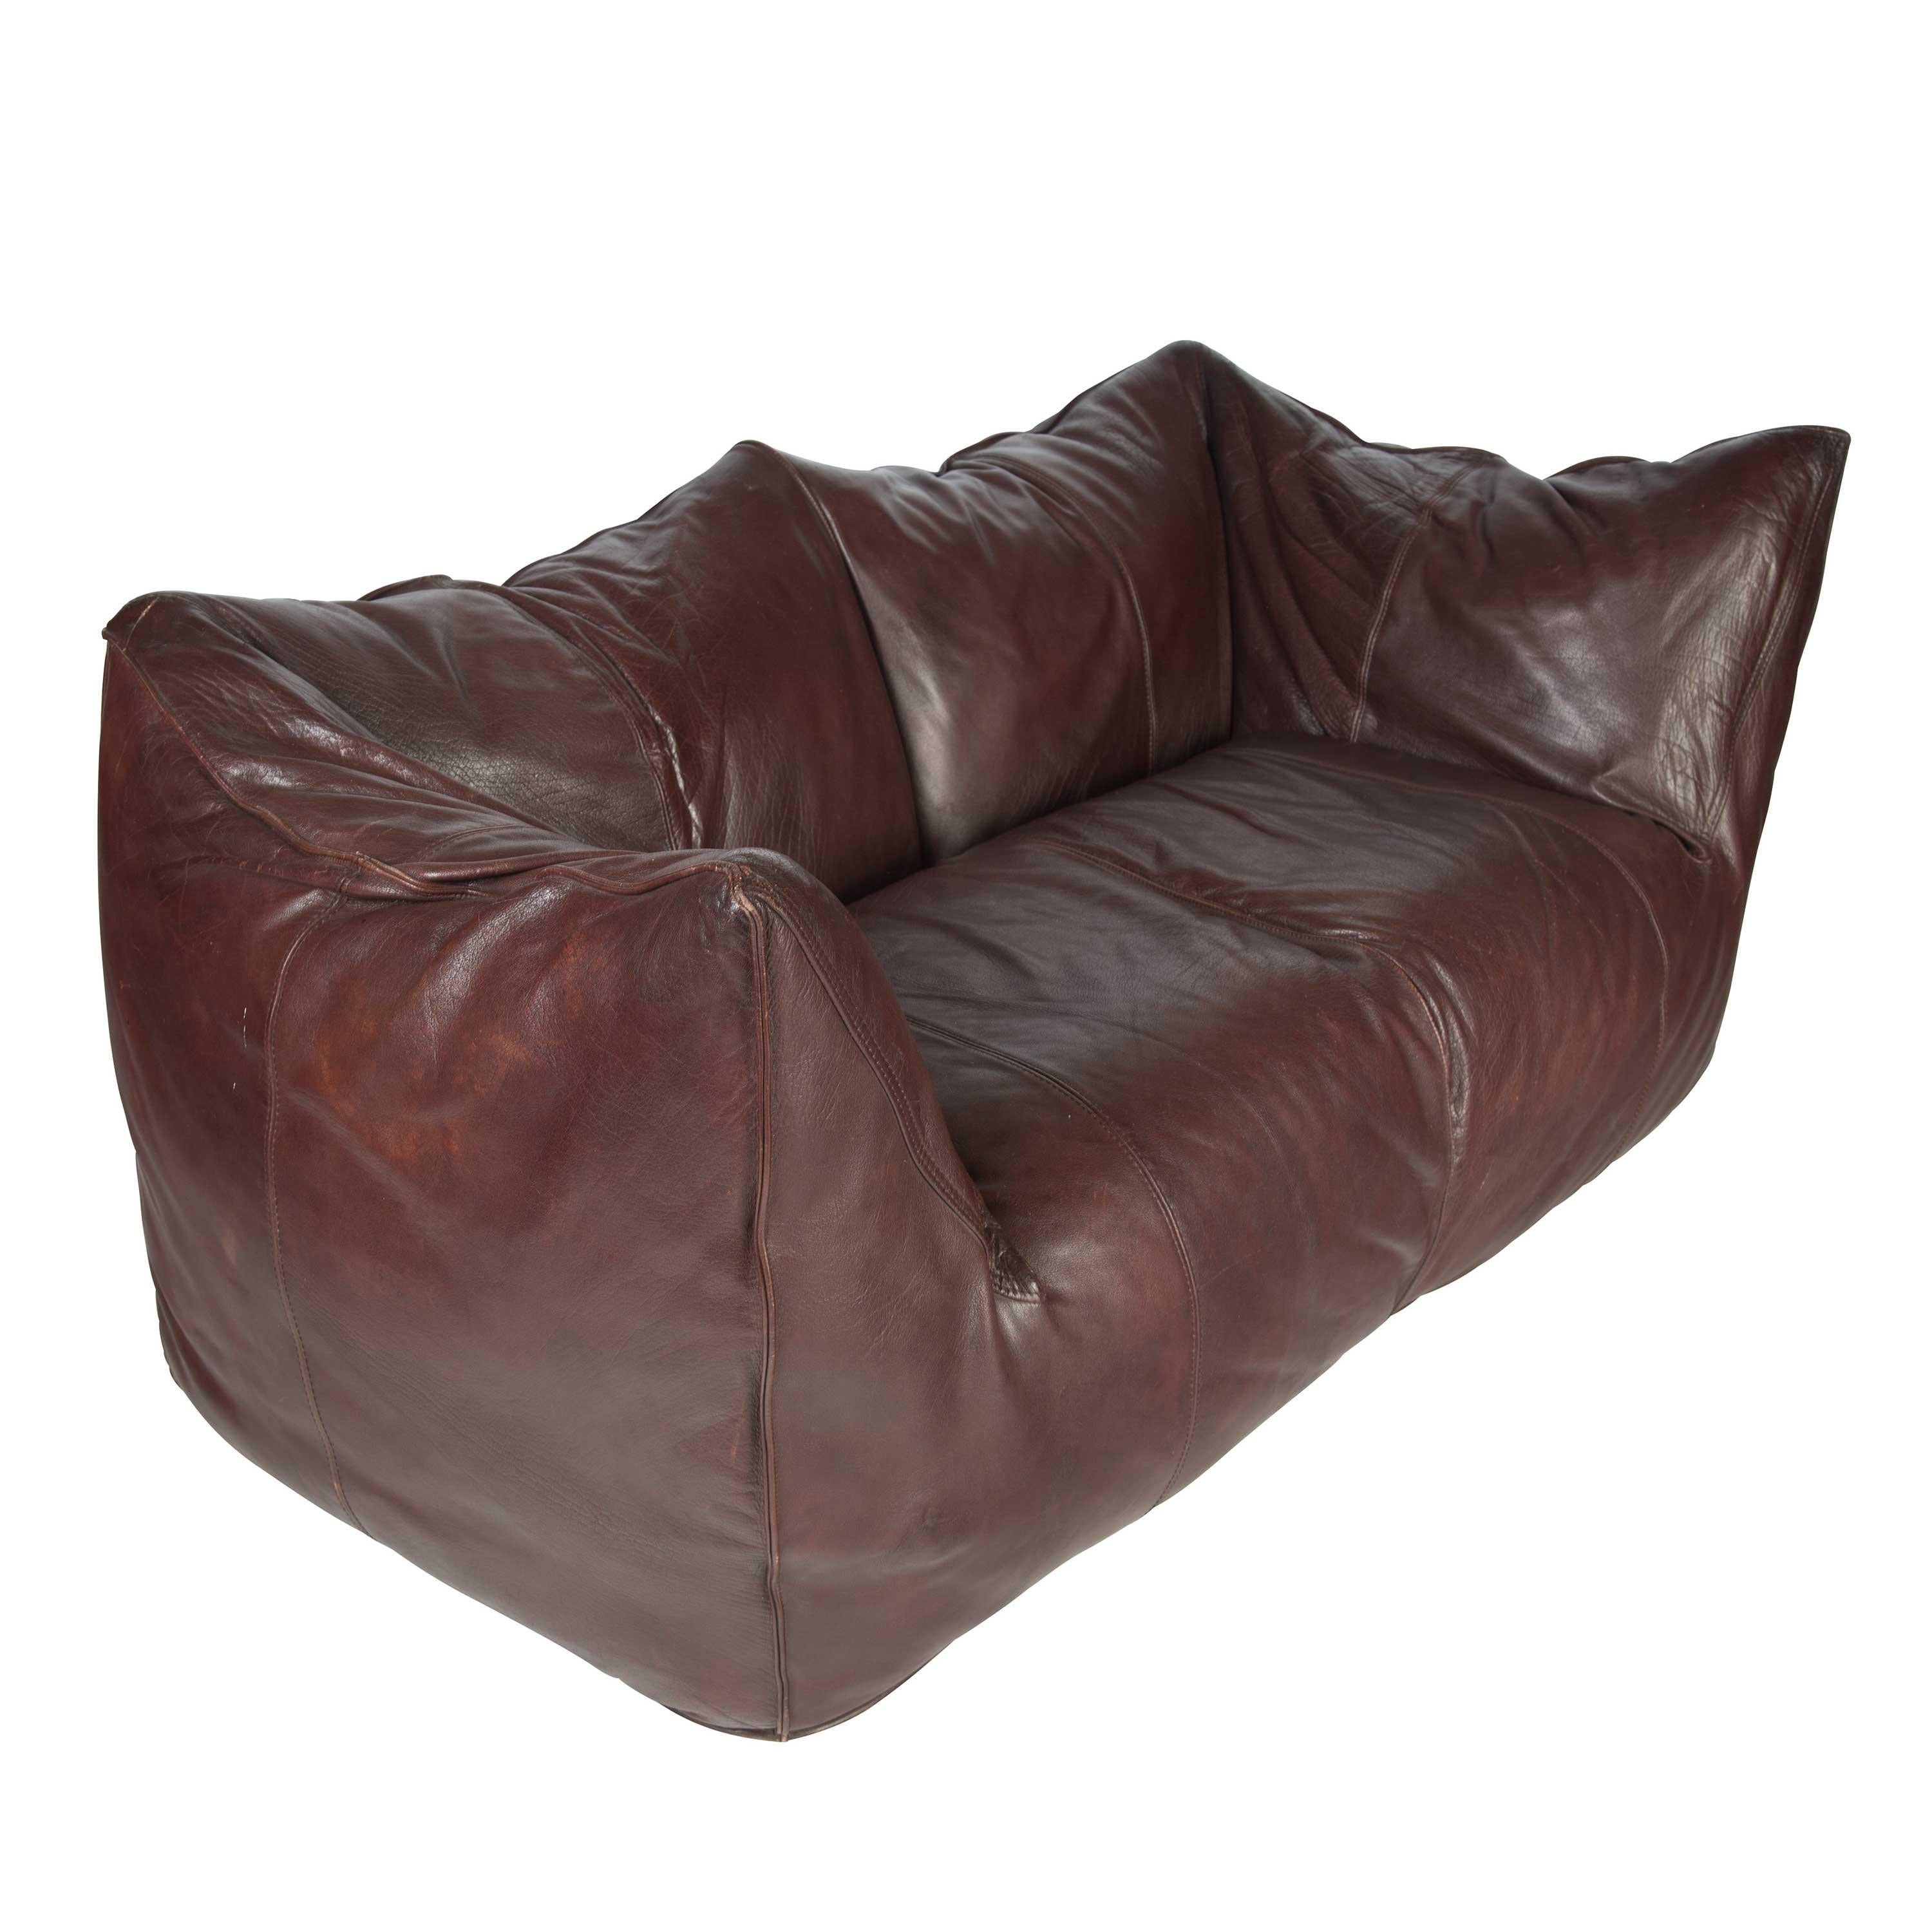 Iconic leather sofa designed by world renowned architect and designer Mario Bellini for B&B Italia during the 1970s. Upholstered in original buffalo leather.
    